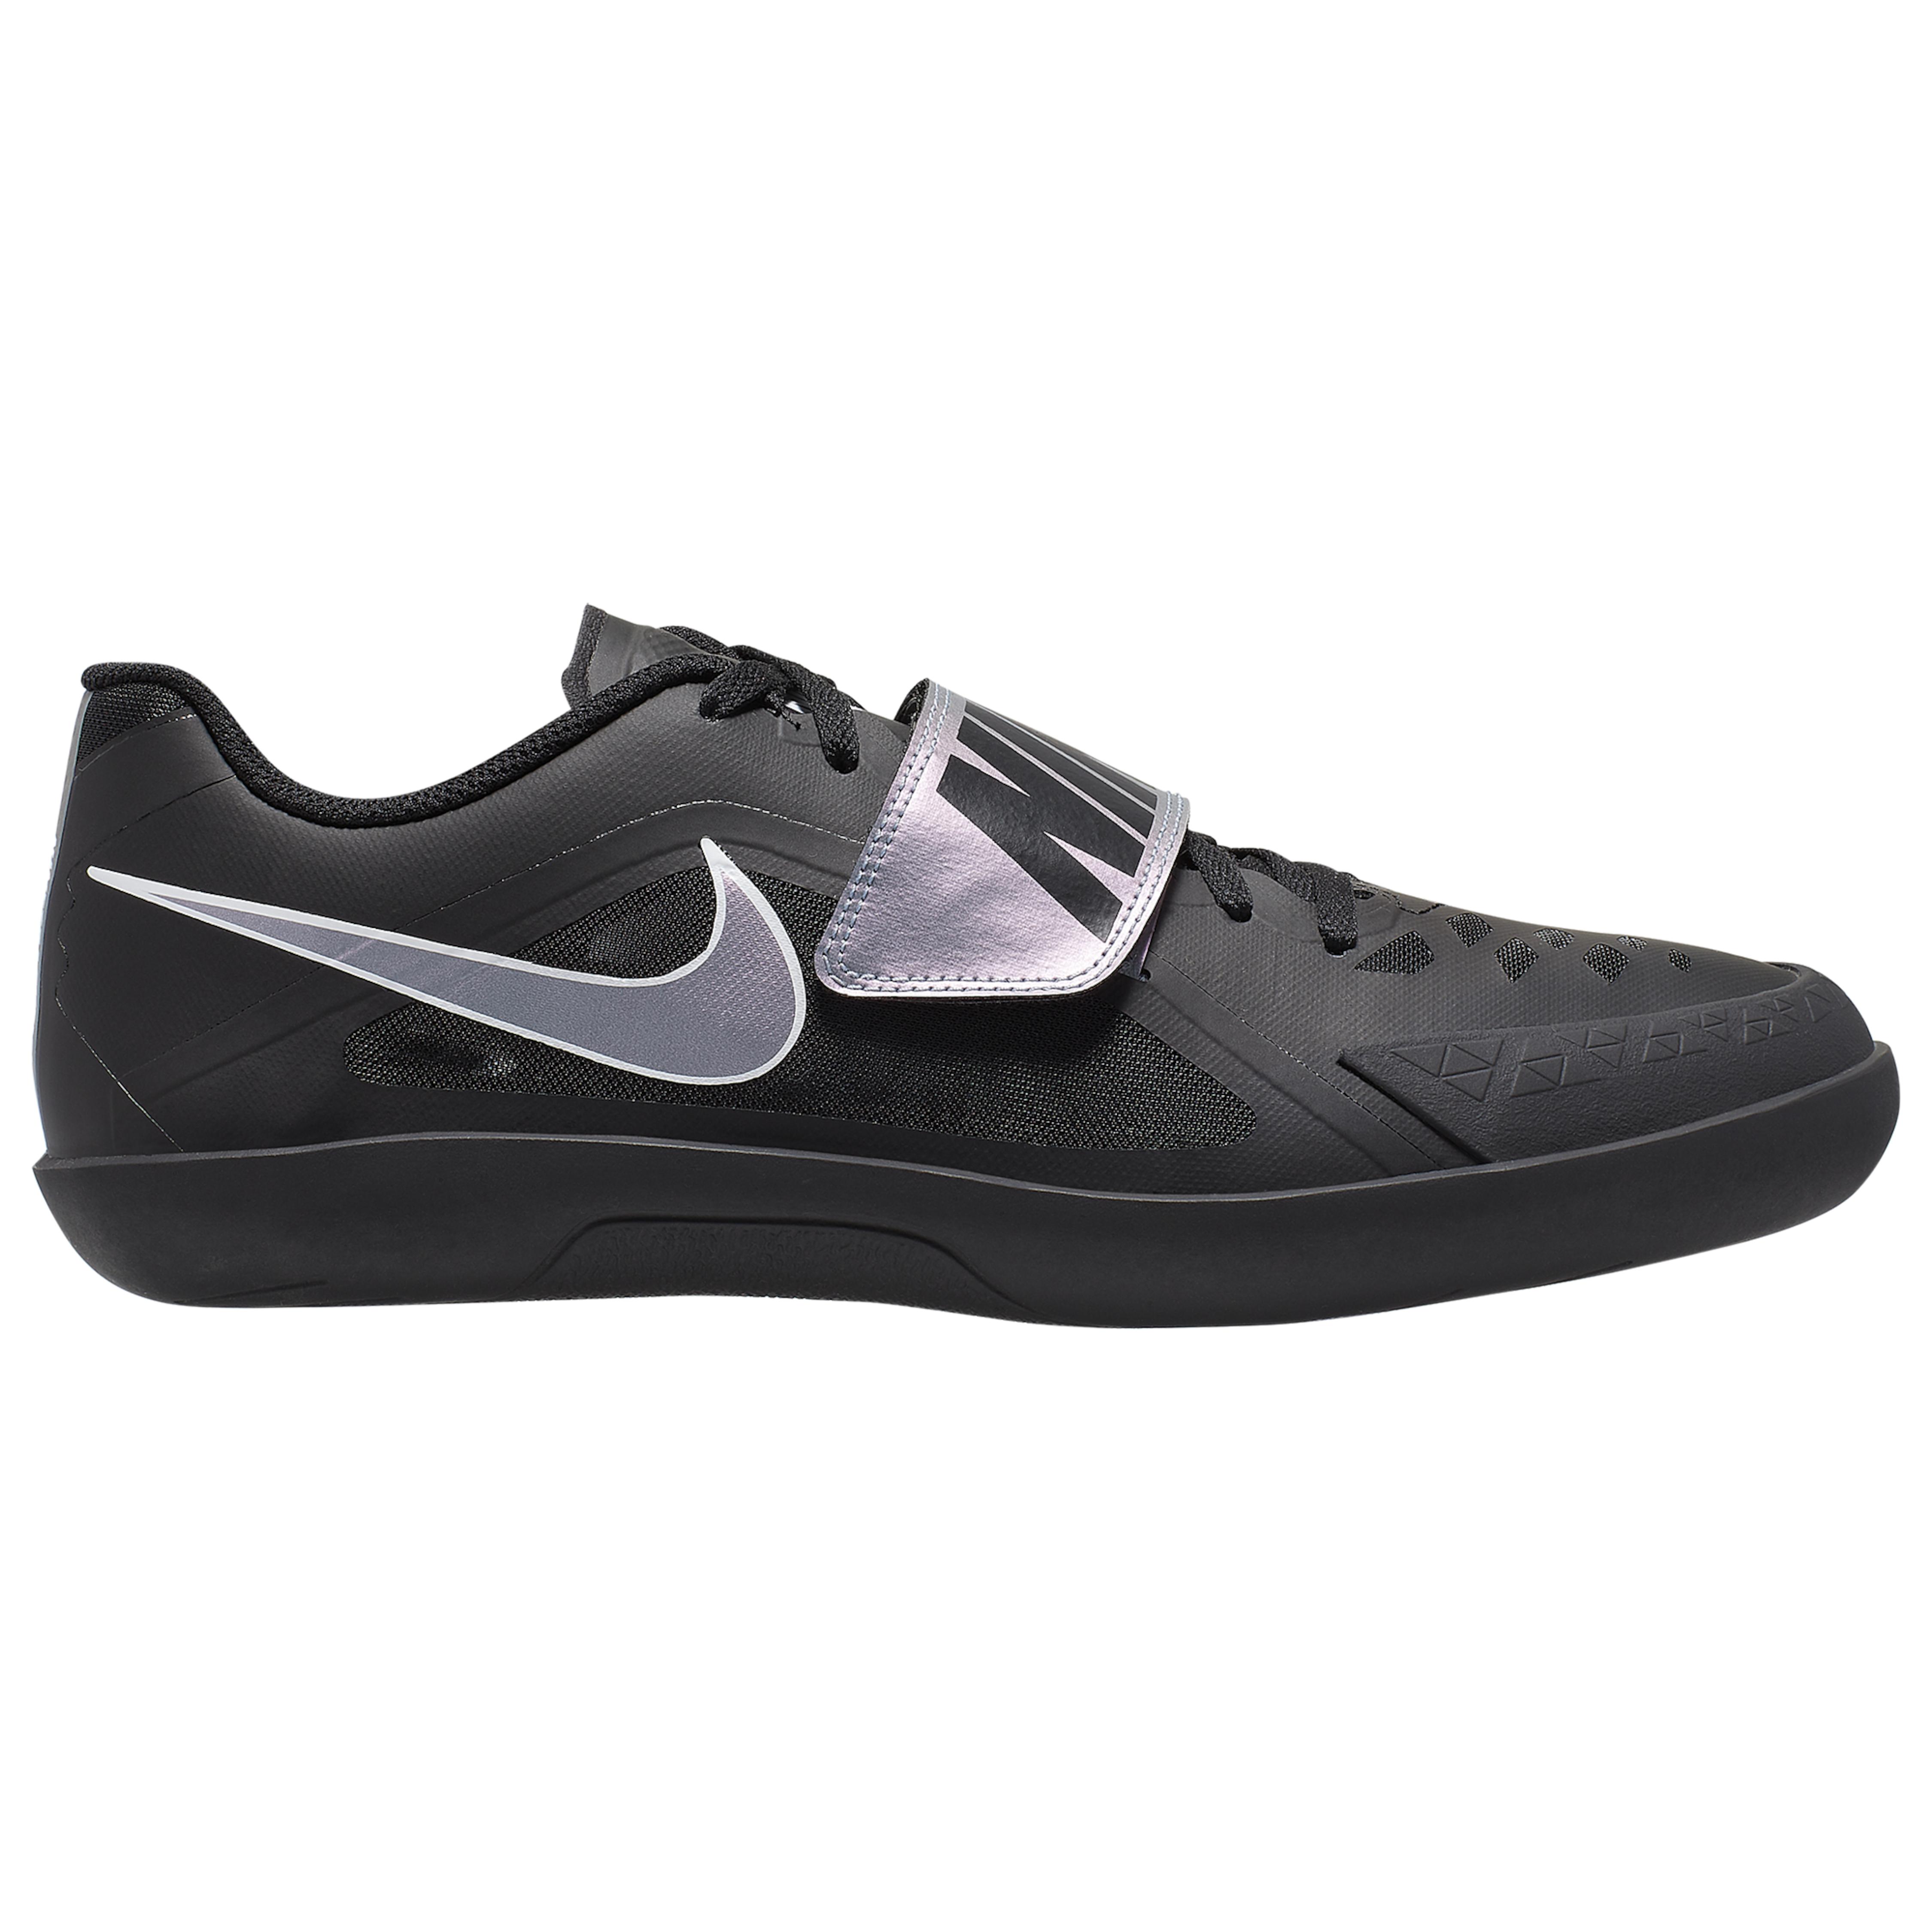 Nike Synthetic Zoom Rival Sd 2 in Black for Men - Lyst